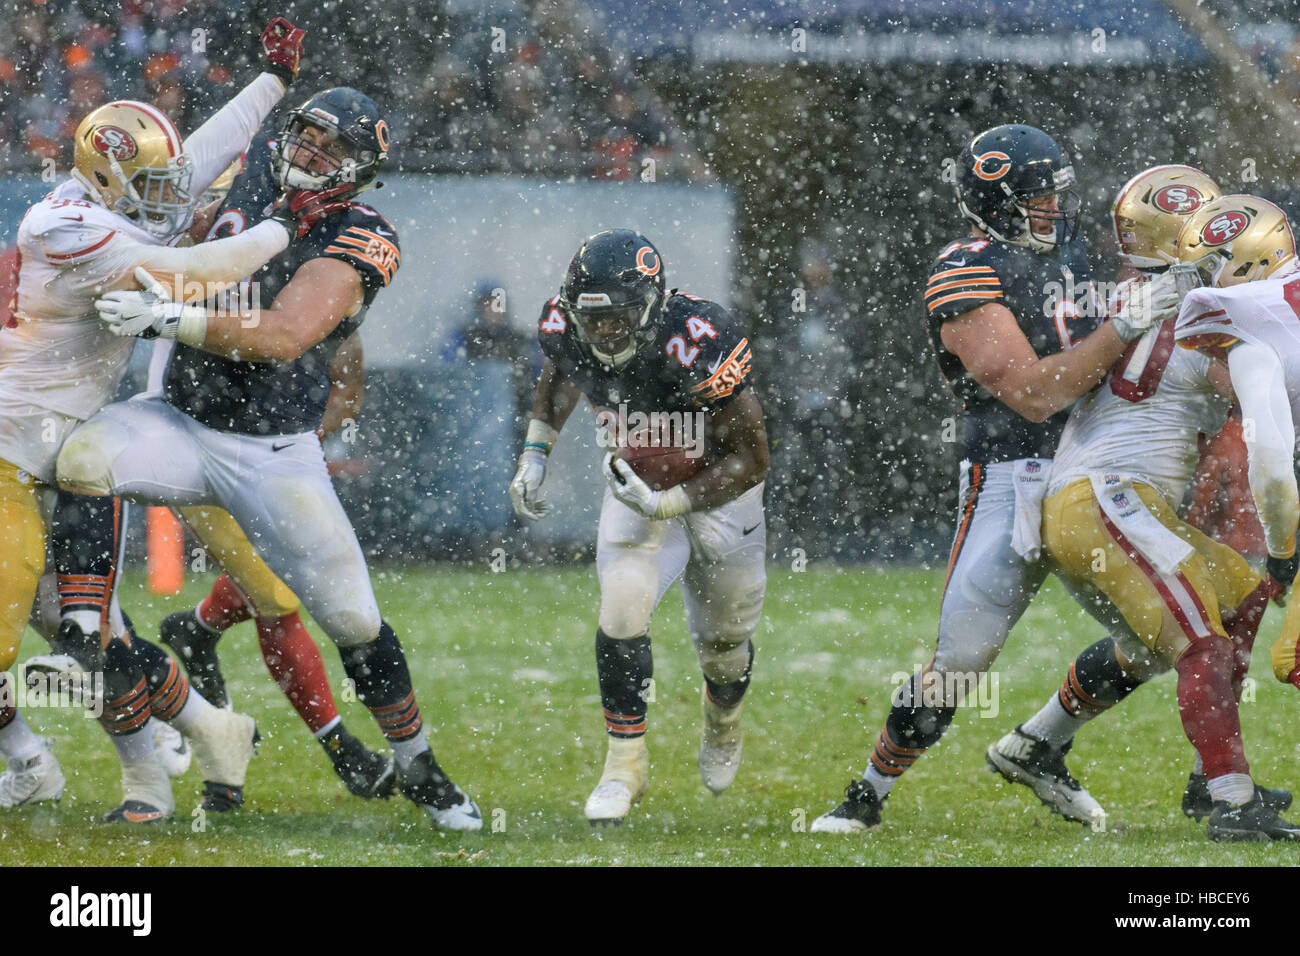 Chicago, USA. 4th December, 2016. Chicago Bears Running Back Jordan Howard (24) runs with the ball in the 3rd quarter during an NFL football game between the San Francisco 49ers and the Chicago Bears at Soldier Field in Chicago, IL. © Action Plus Sports Images/Alamy Live News Stock Photo